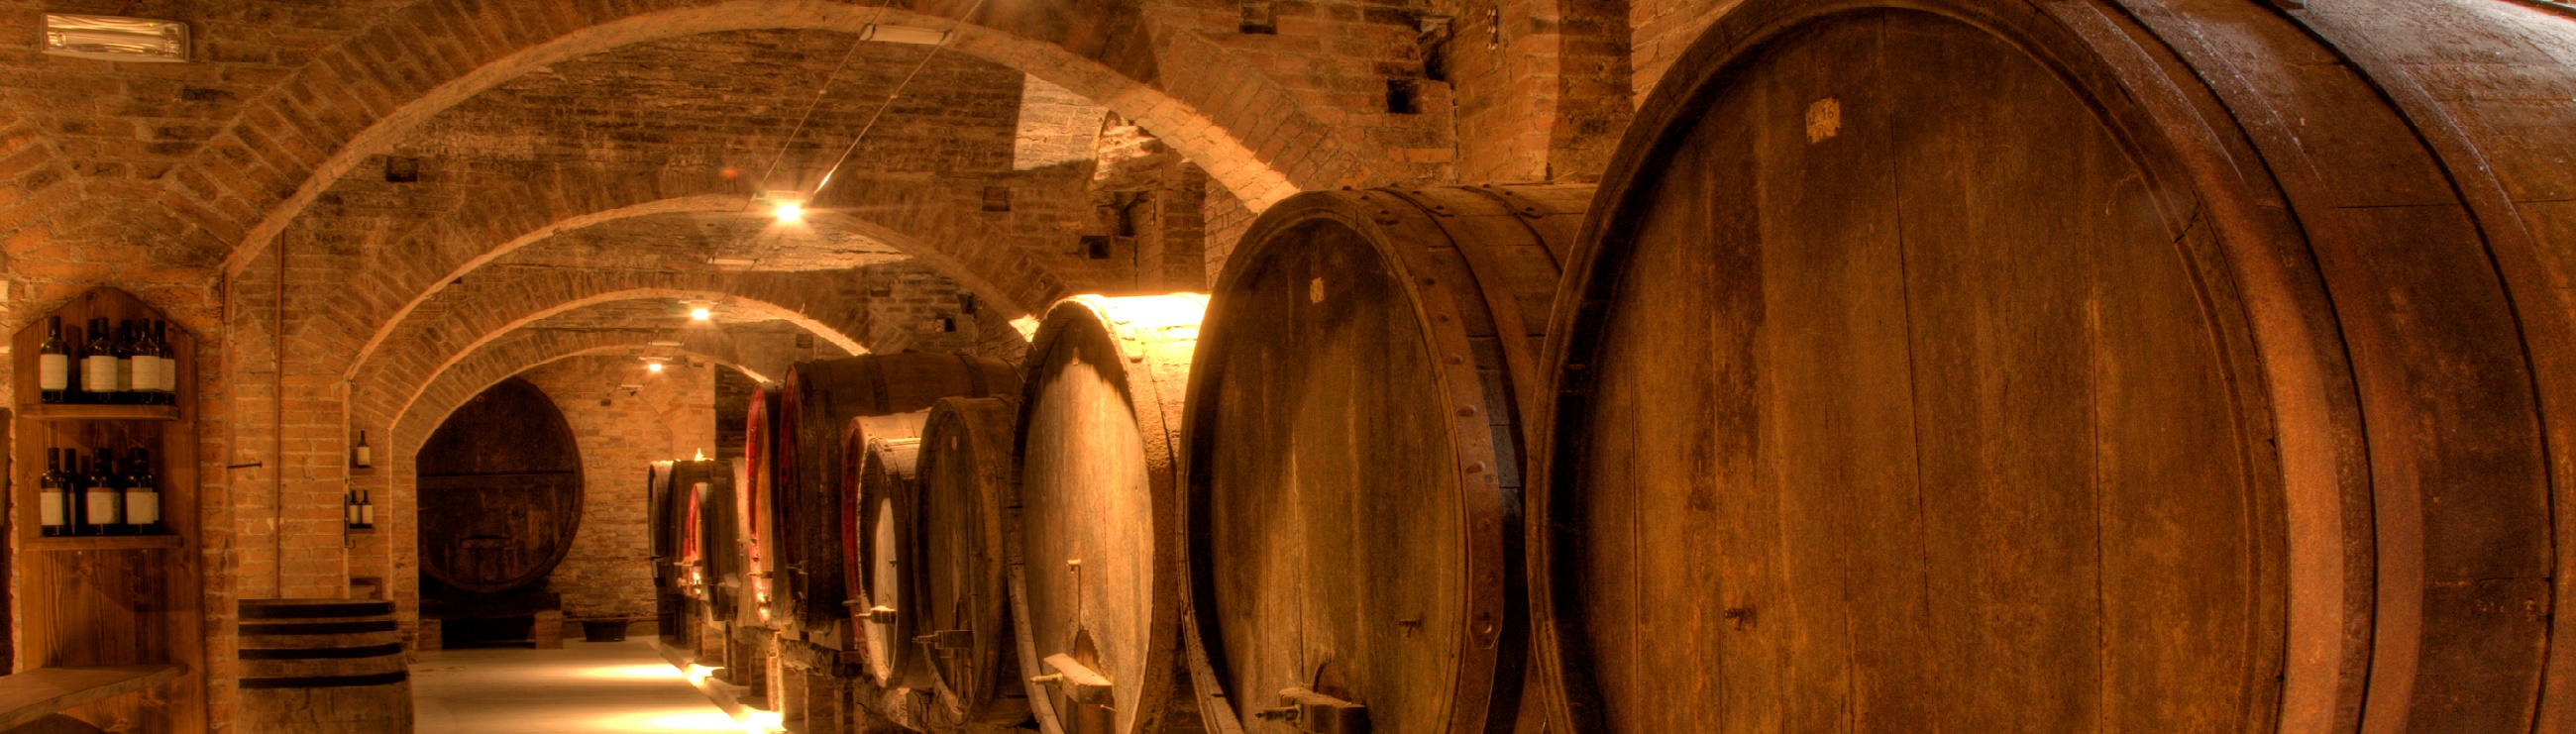 Wine cellar in ancient building in Tuscany, Italy